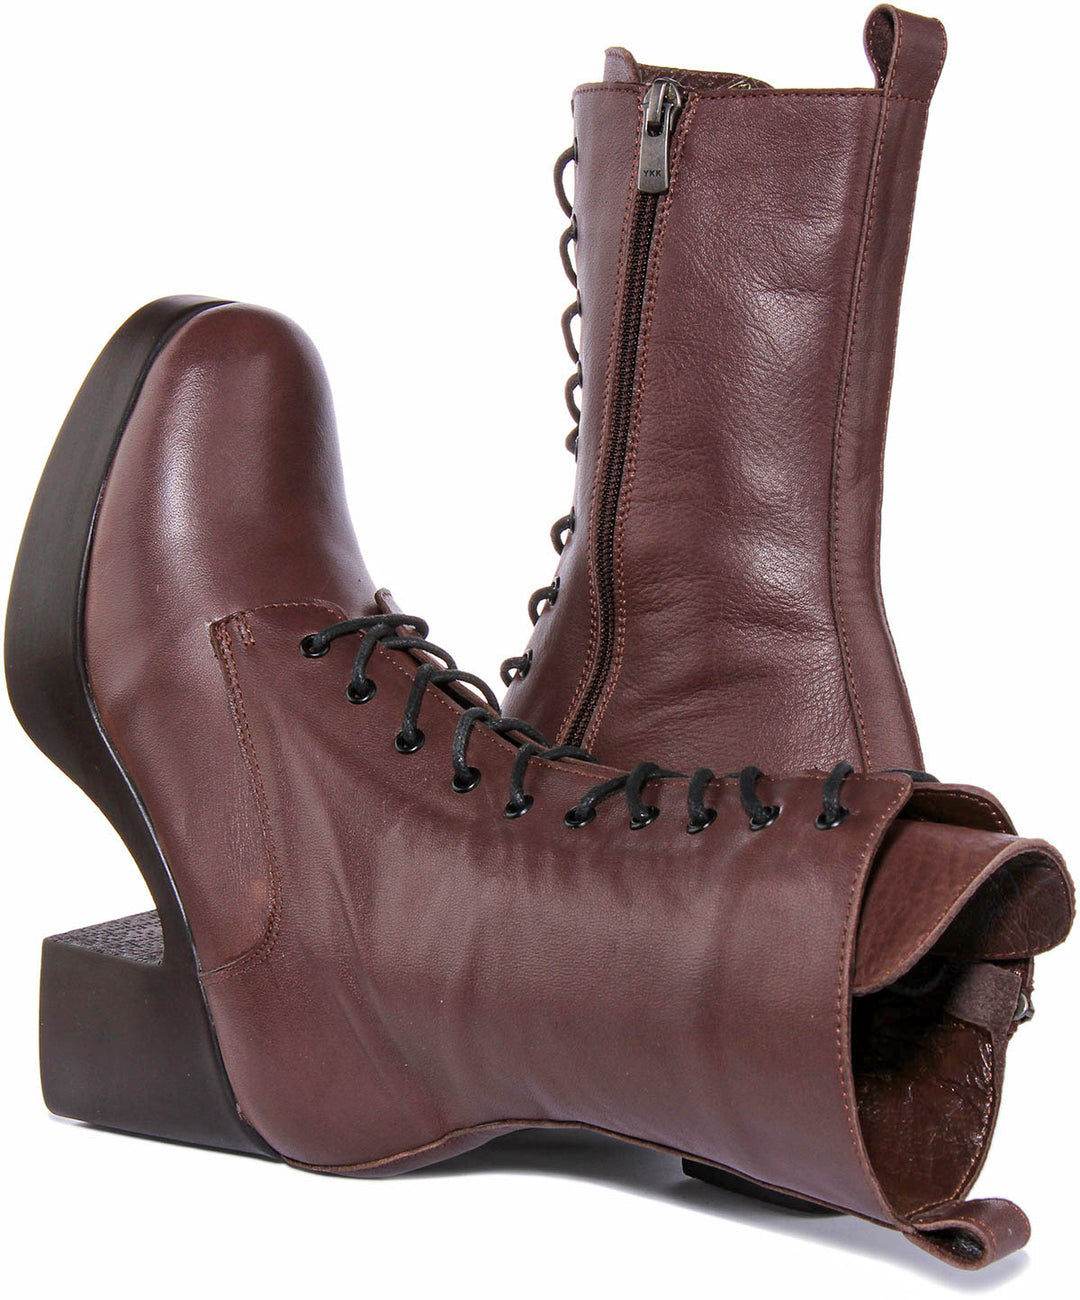 Frida Lace up High Boot In Brown